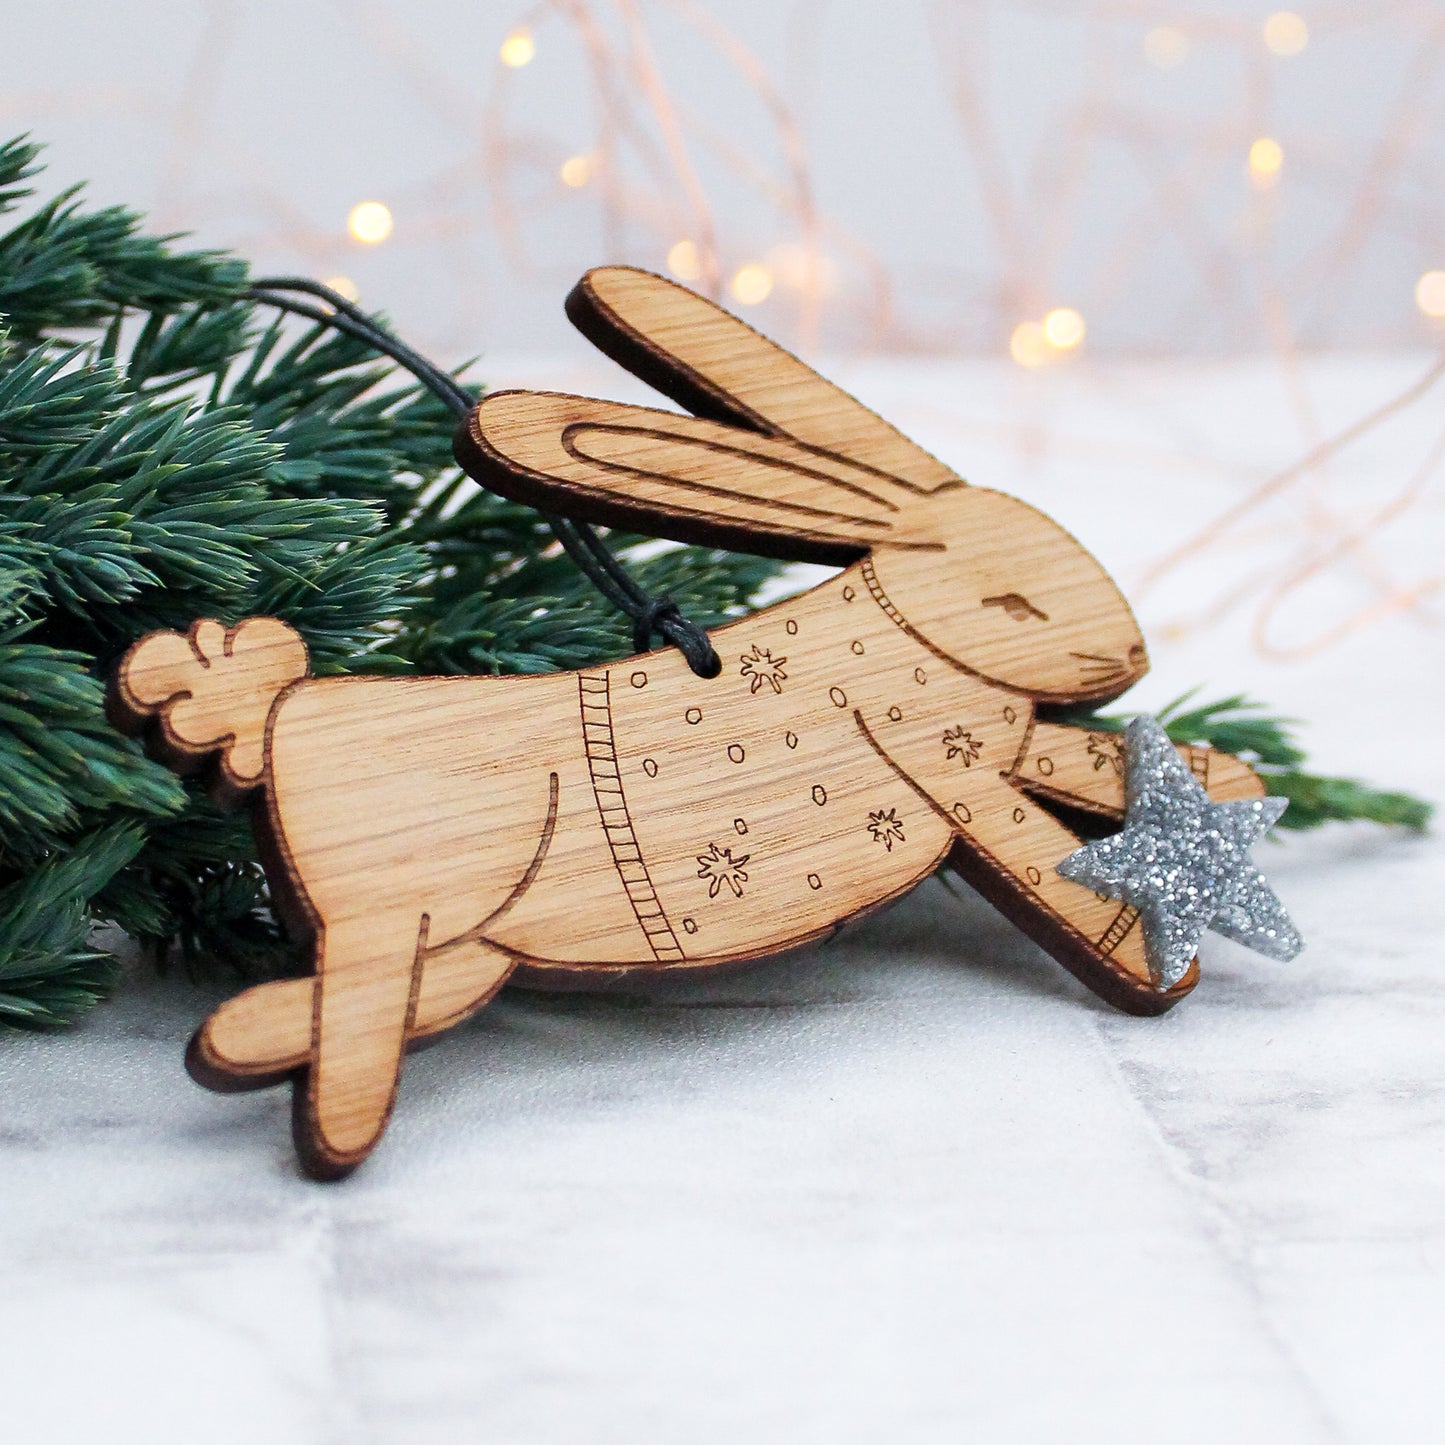 wooden bunny rabbit Christmas tree decoration in winter jumper and holding a silver star